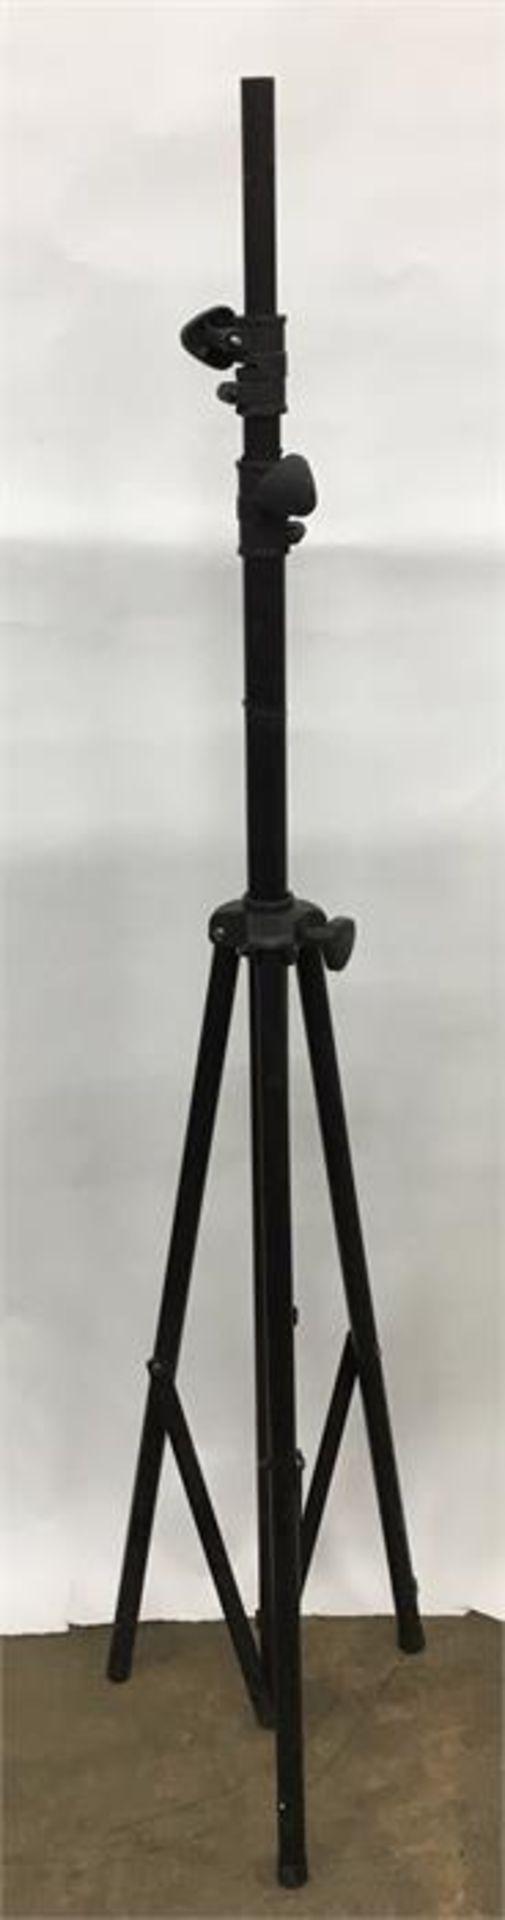 Large tripod stand for microphone/camera